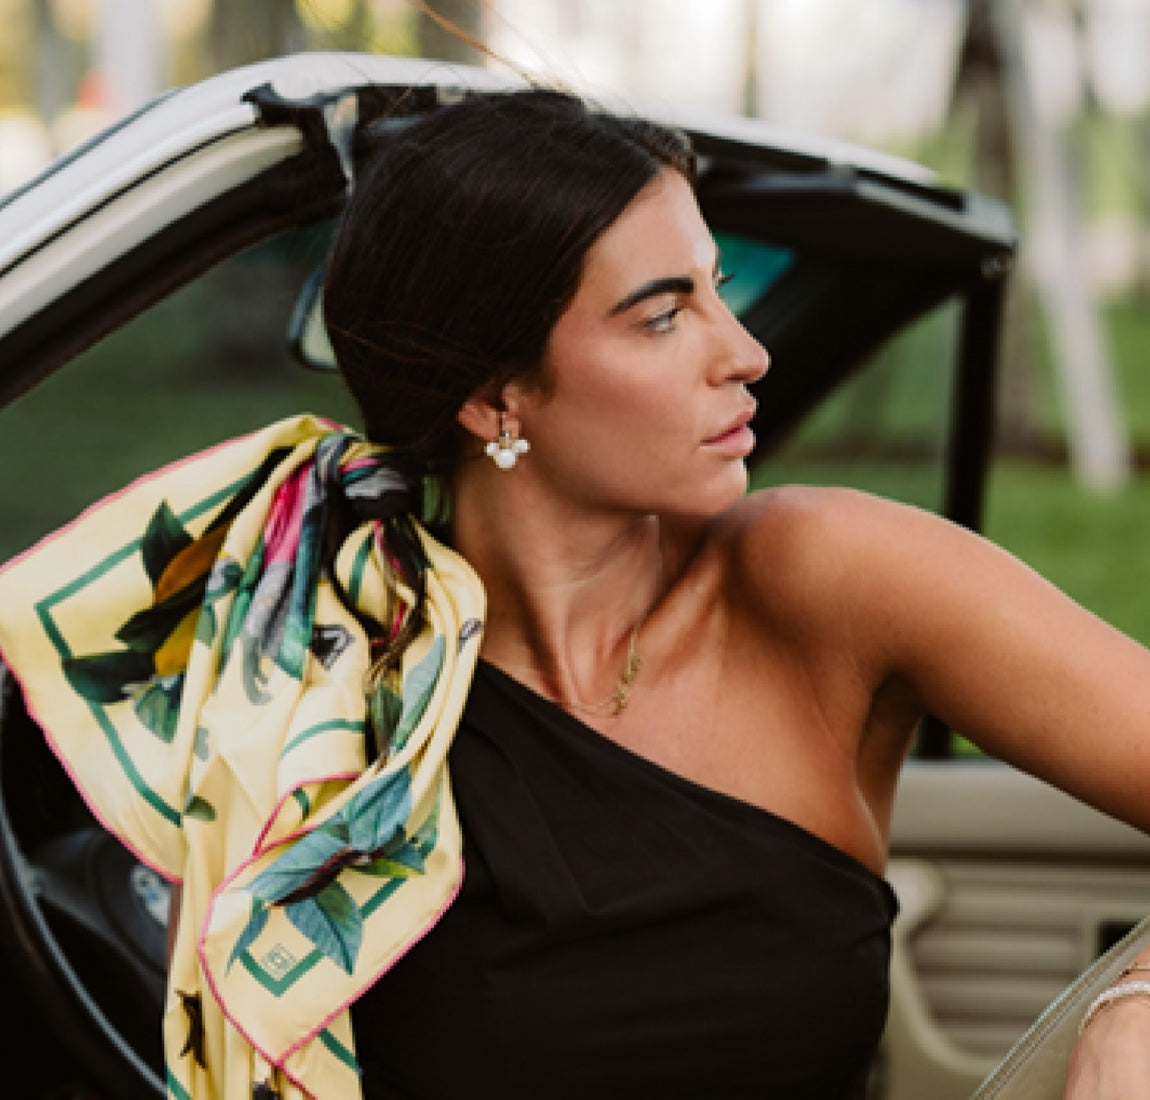 Brunette with off the shoulder top wears scarf in her hair while sitting in convertible.